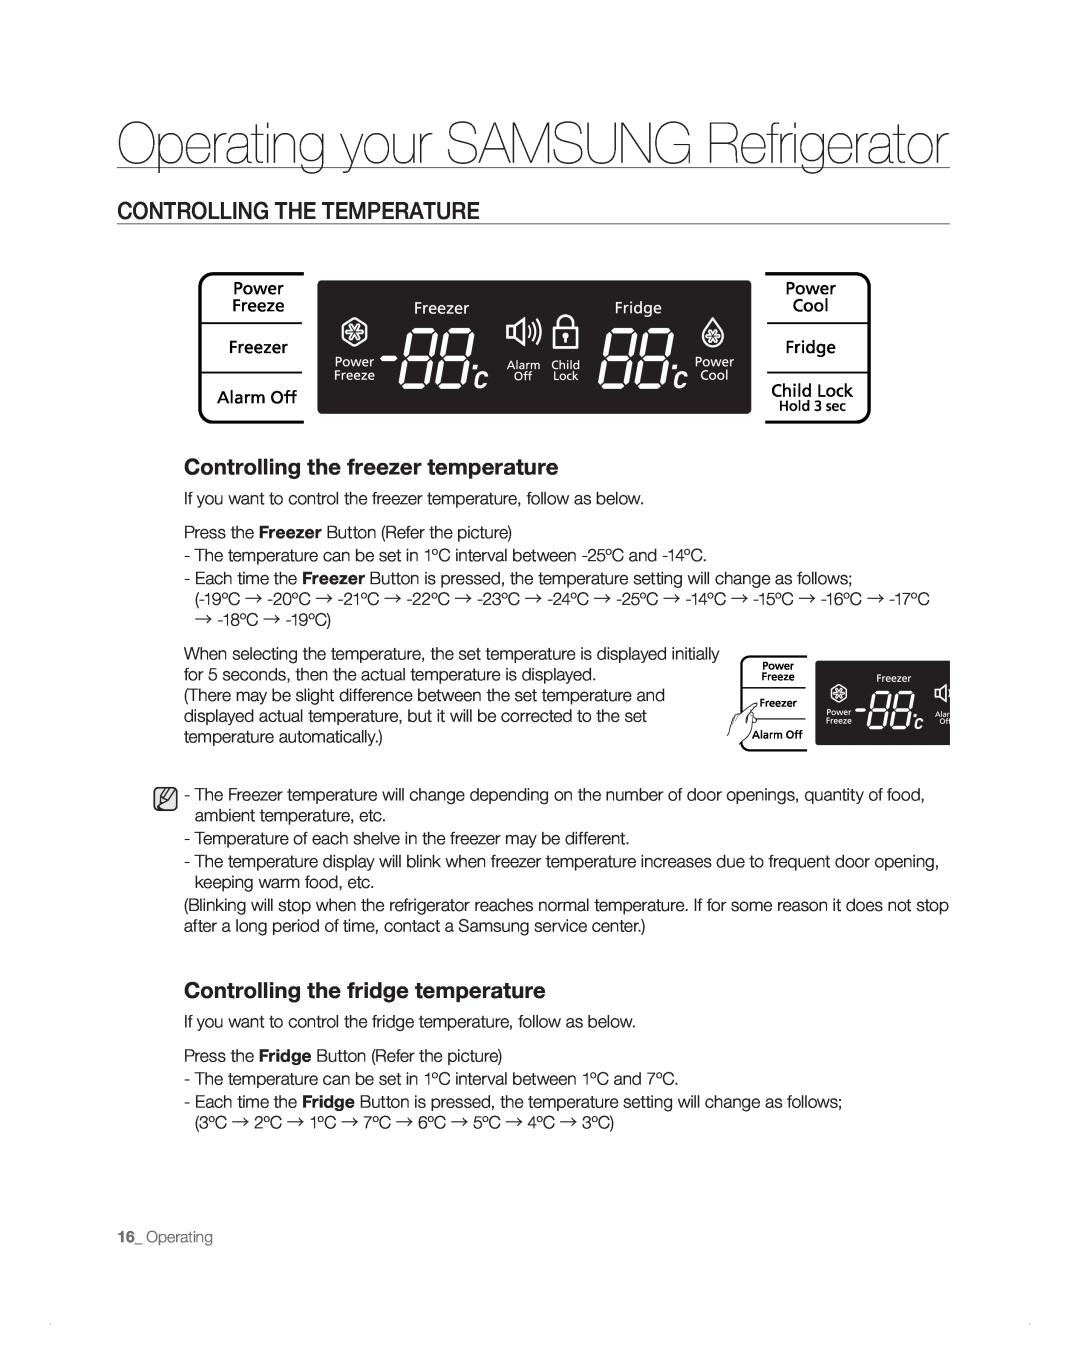 Samsung RB216AB, RB194AB, RB1AB, RB214AB, RB196AB user manual Operating your SAMSUNG Refrigerator, Controlling the temperature 